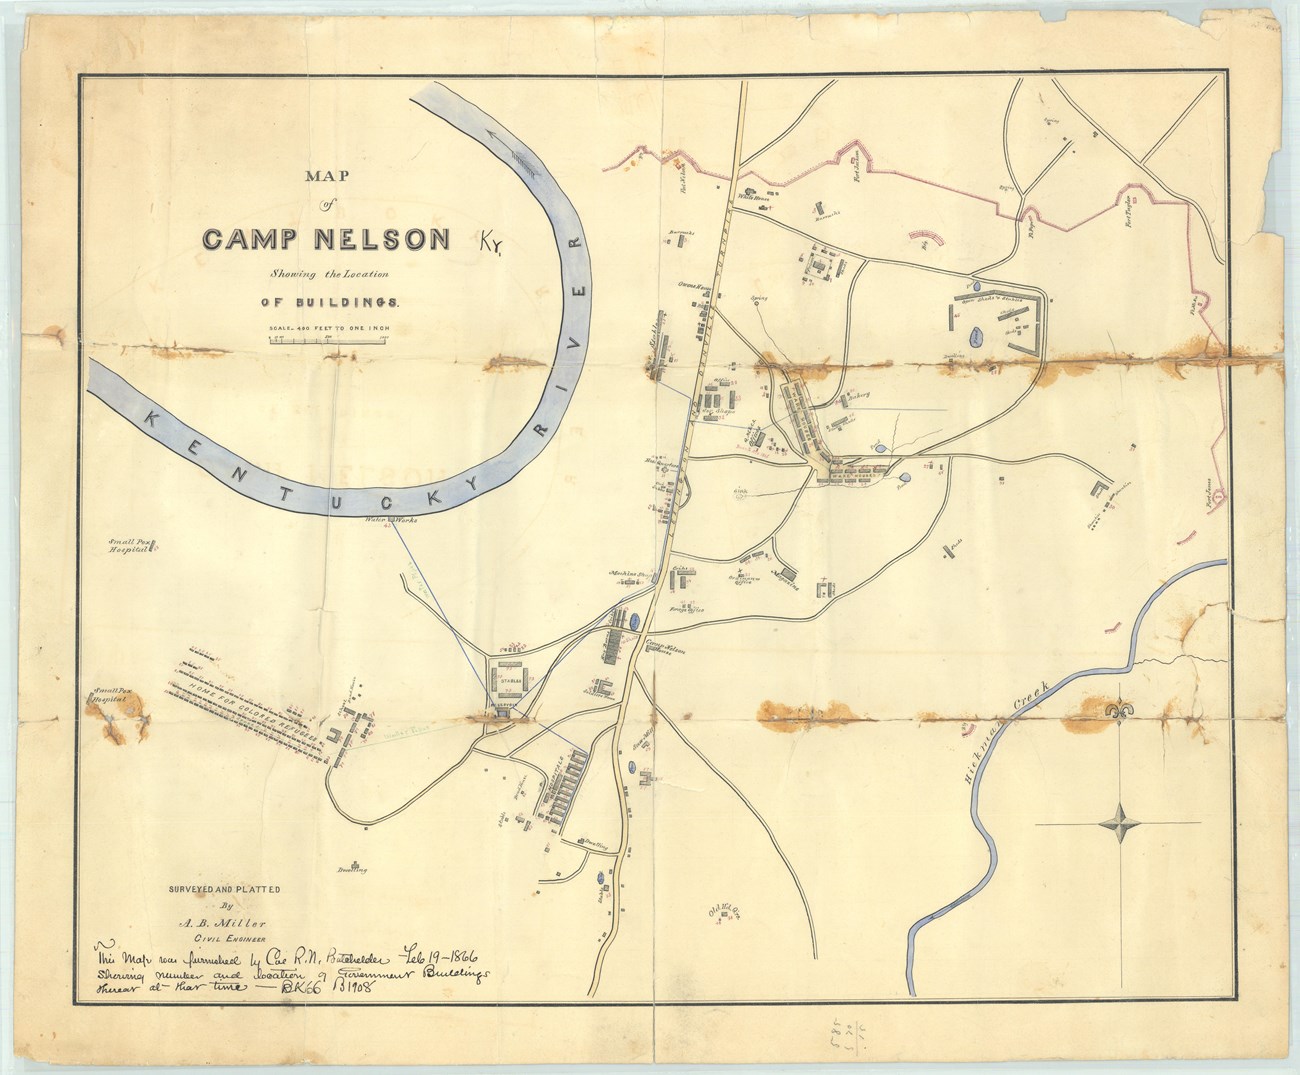 1866 Map of Camp Nelson.